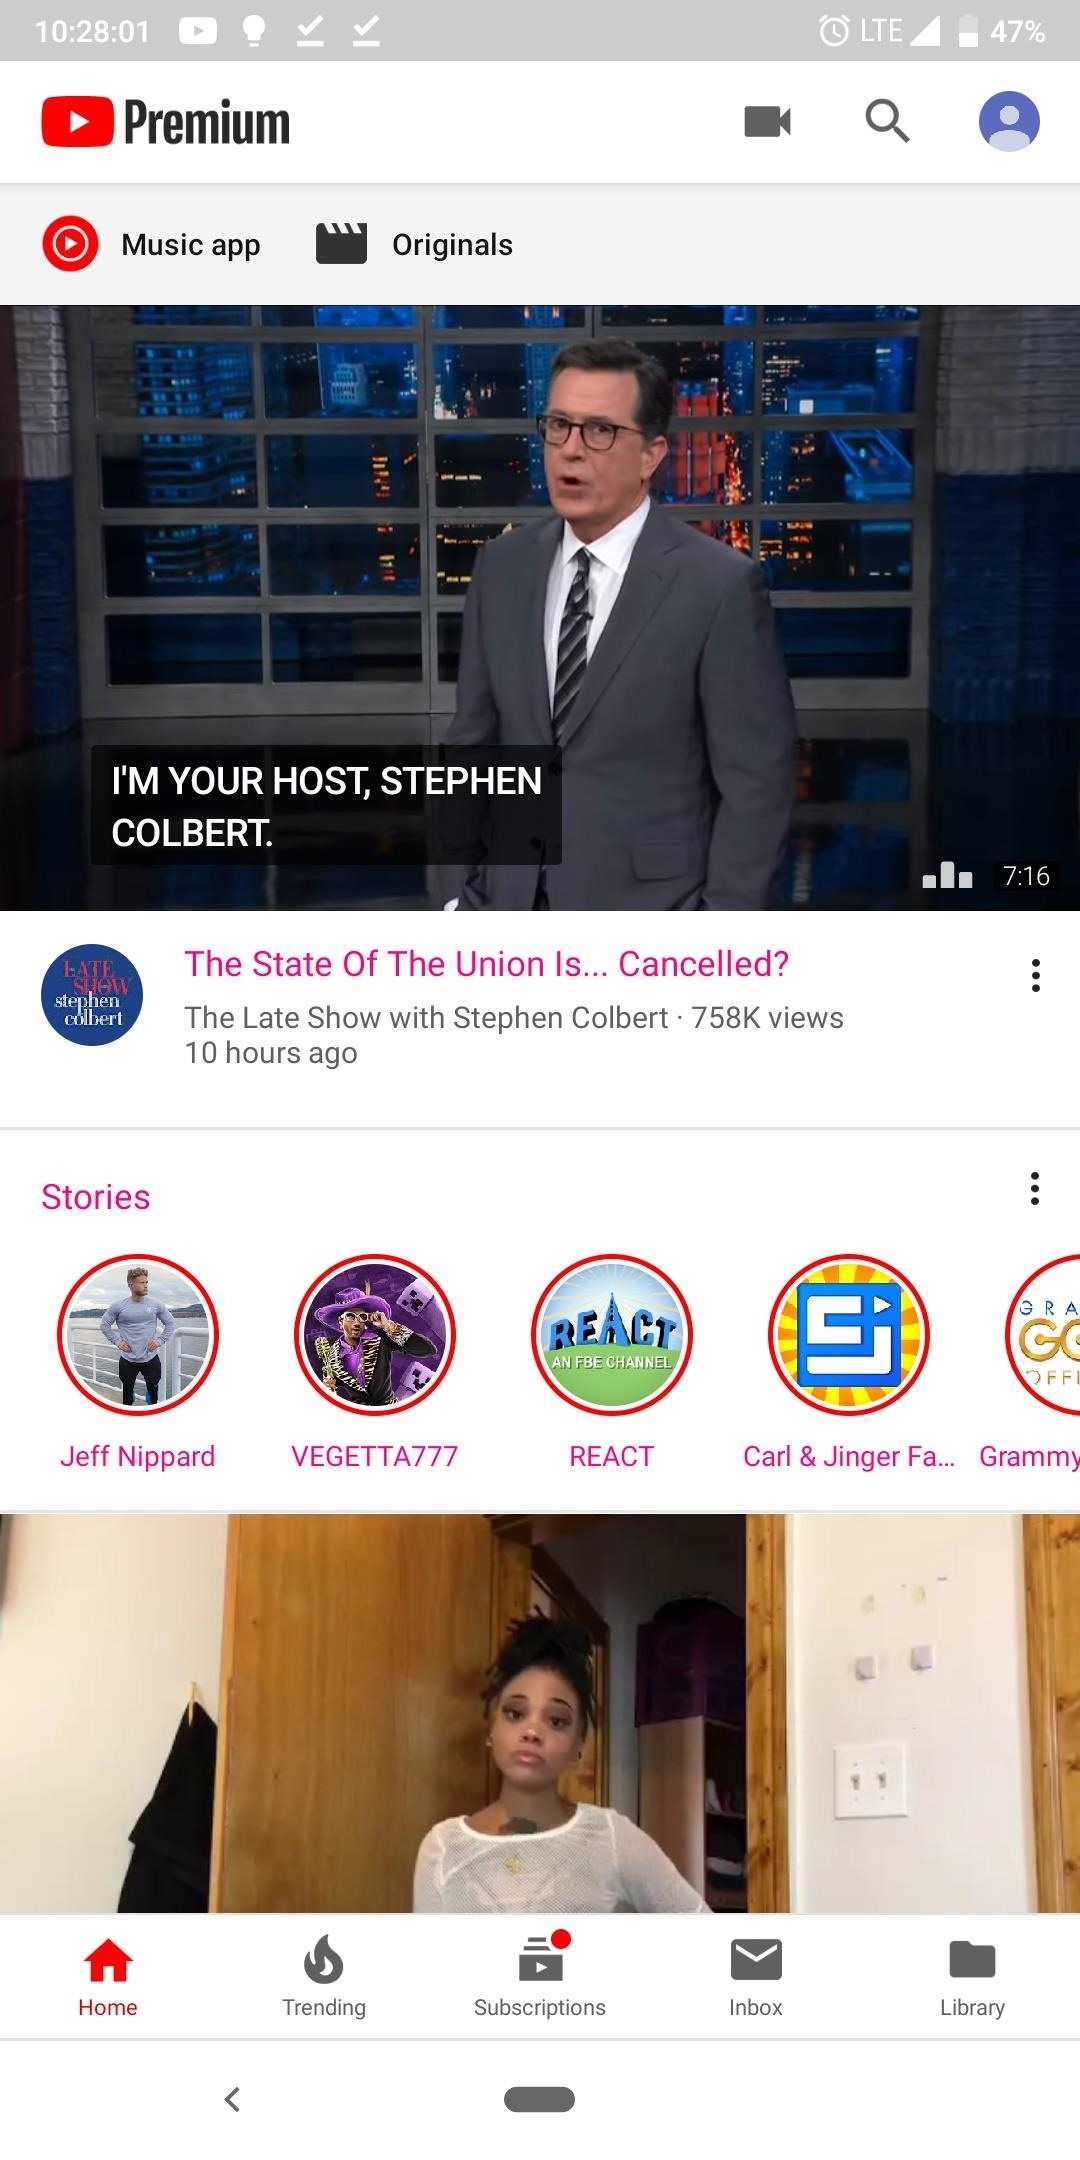 How to Get Custom Themes for YouTube on Android — Even a True Black OLED Theme